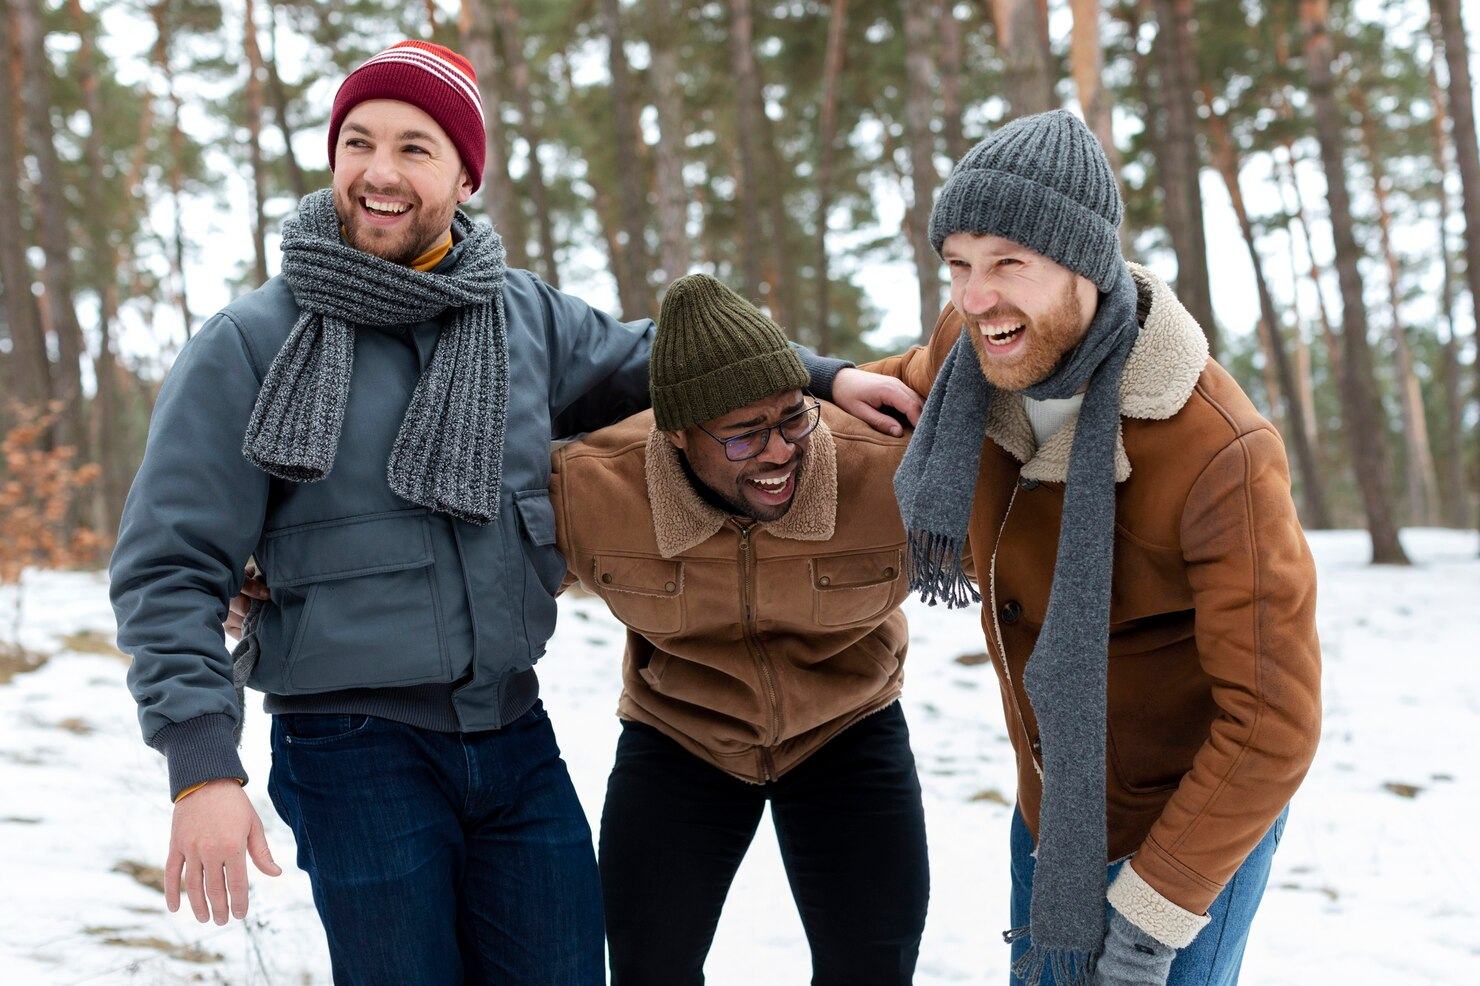 Three male friends enjoying a joyful moment together in the winter.
